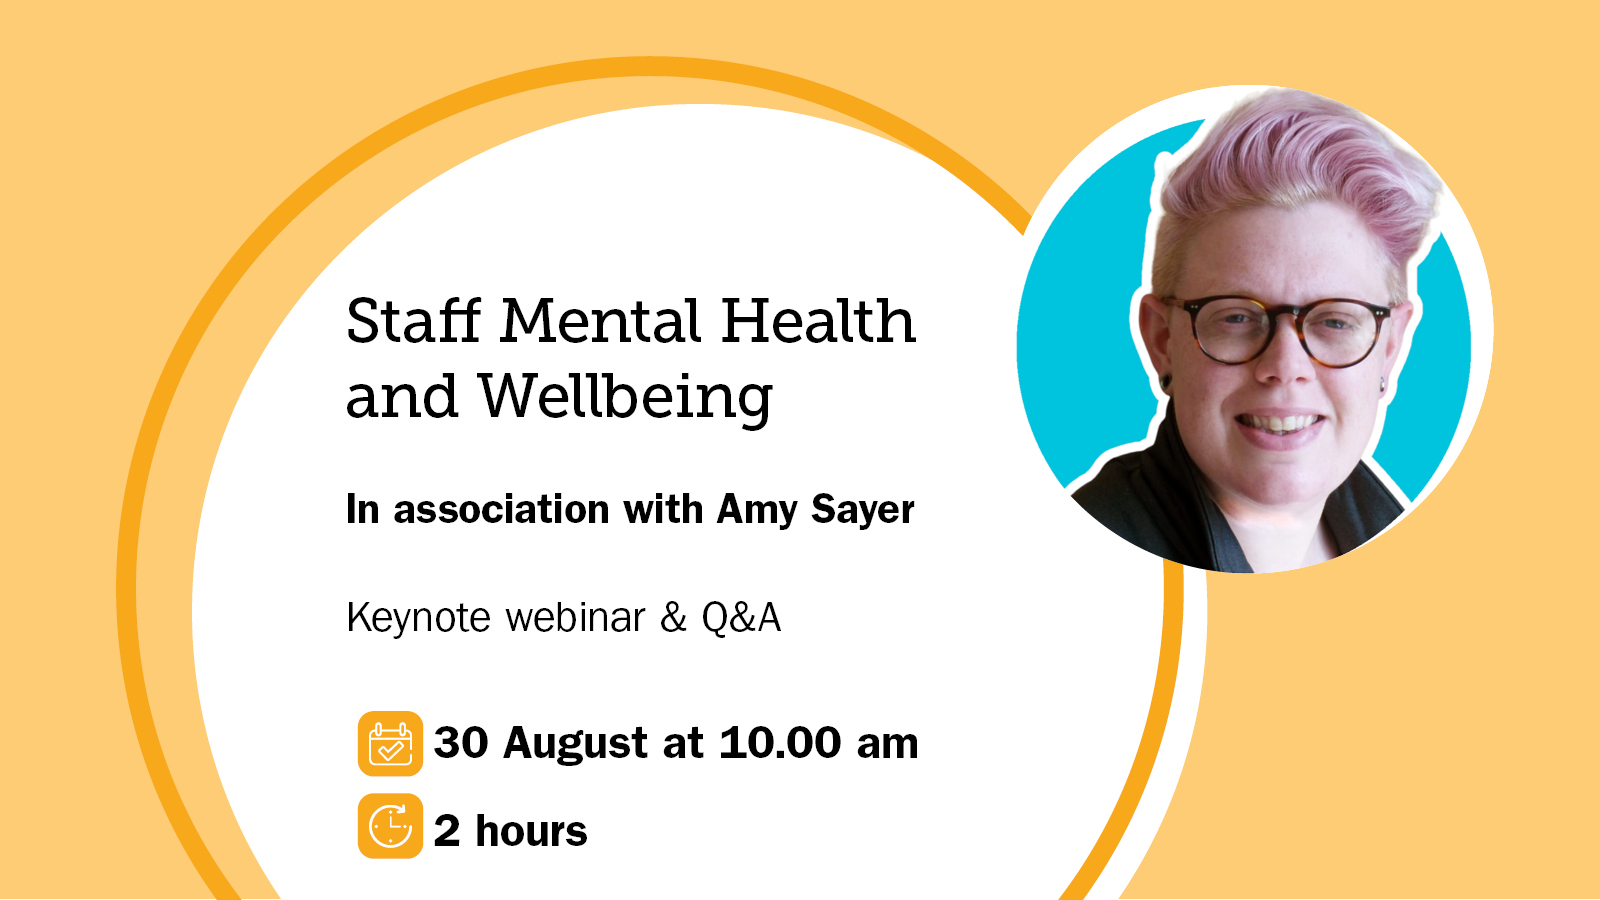 Amy Sayer: Staff Mental Health and Wellbeing